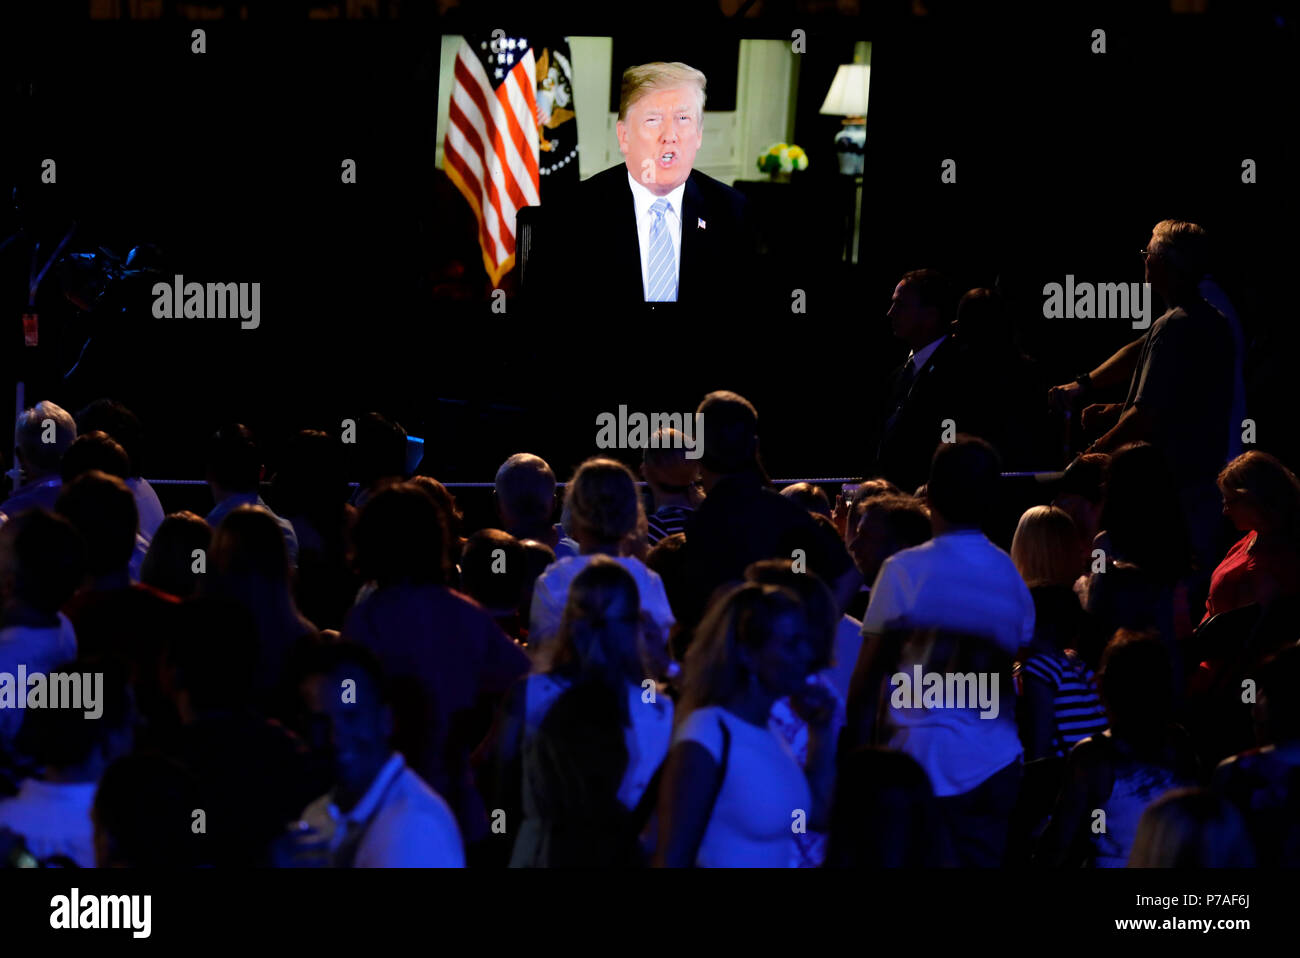 Guests watch U.S. President Donald Trump's address of the South Lawn of the White House before a fireworks display in Washington, DC, U.S., on Wednesday, July 4, 2018. Trump's campaign won the technical knockout of a lawsuit filed by two Democratic National Committee donors and a DNC staffer who accused it of colluding with Russian to publish compromising information about the Clinton campaign on WikiLeaks that included details about their lives. Credit: Yuri Gripas/Pool via CNP /MediaPunch Stock Photo